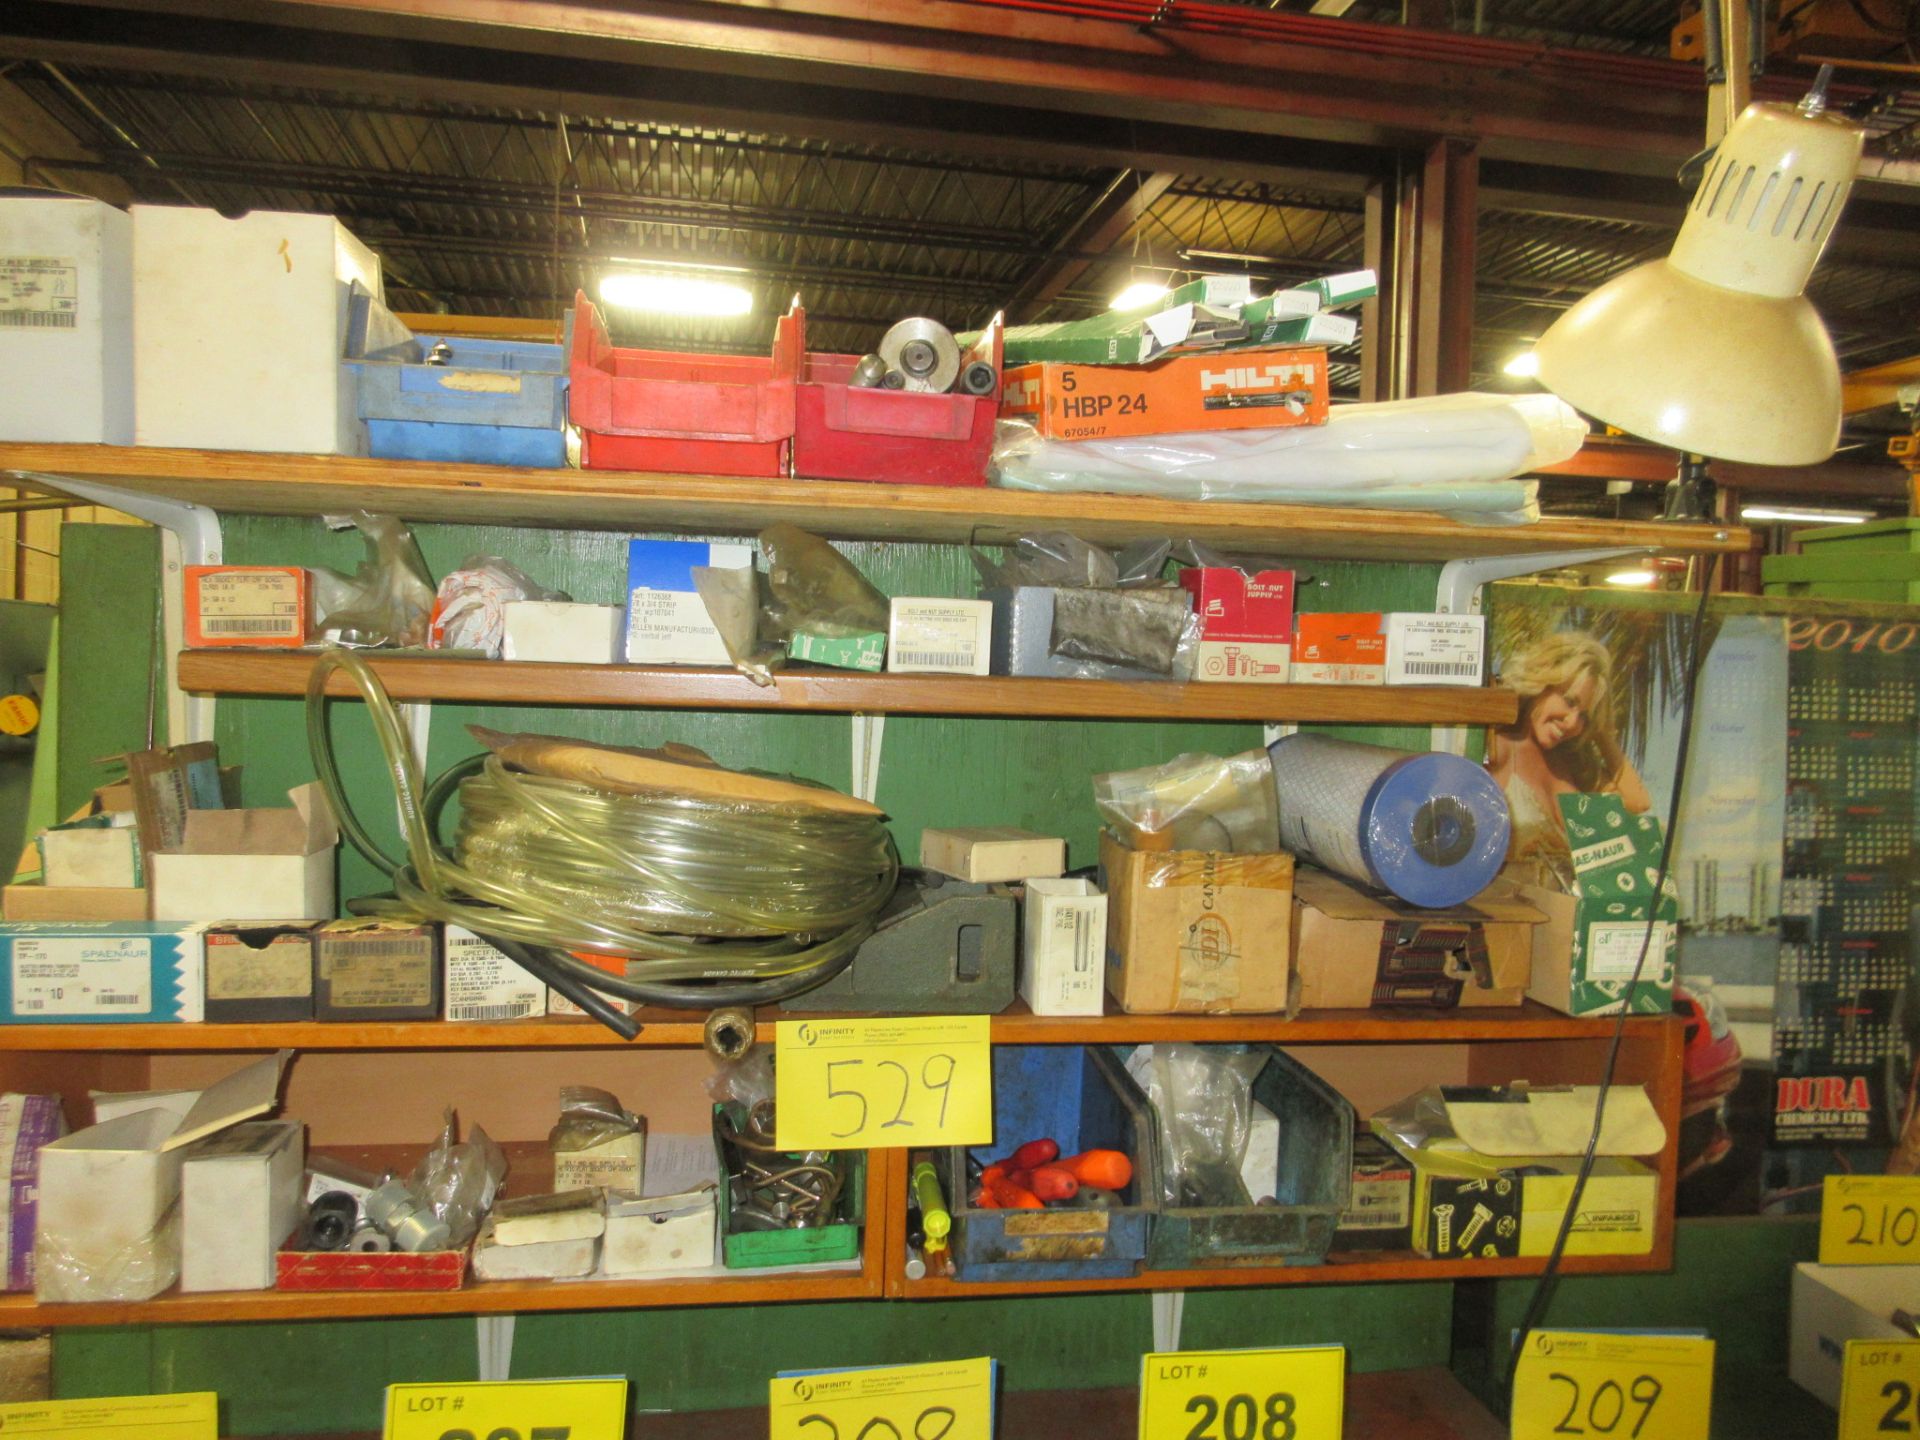 CONTENTS OF 4-LEVEL WOOD SHELVING UNIT, FASTENERS, FILTERS, PARTS, ETC.